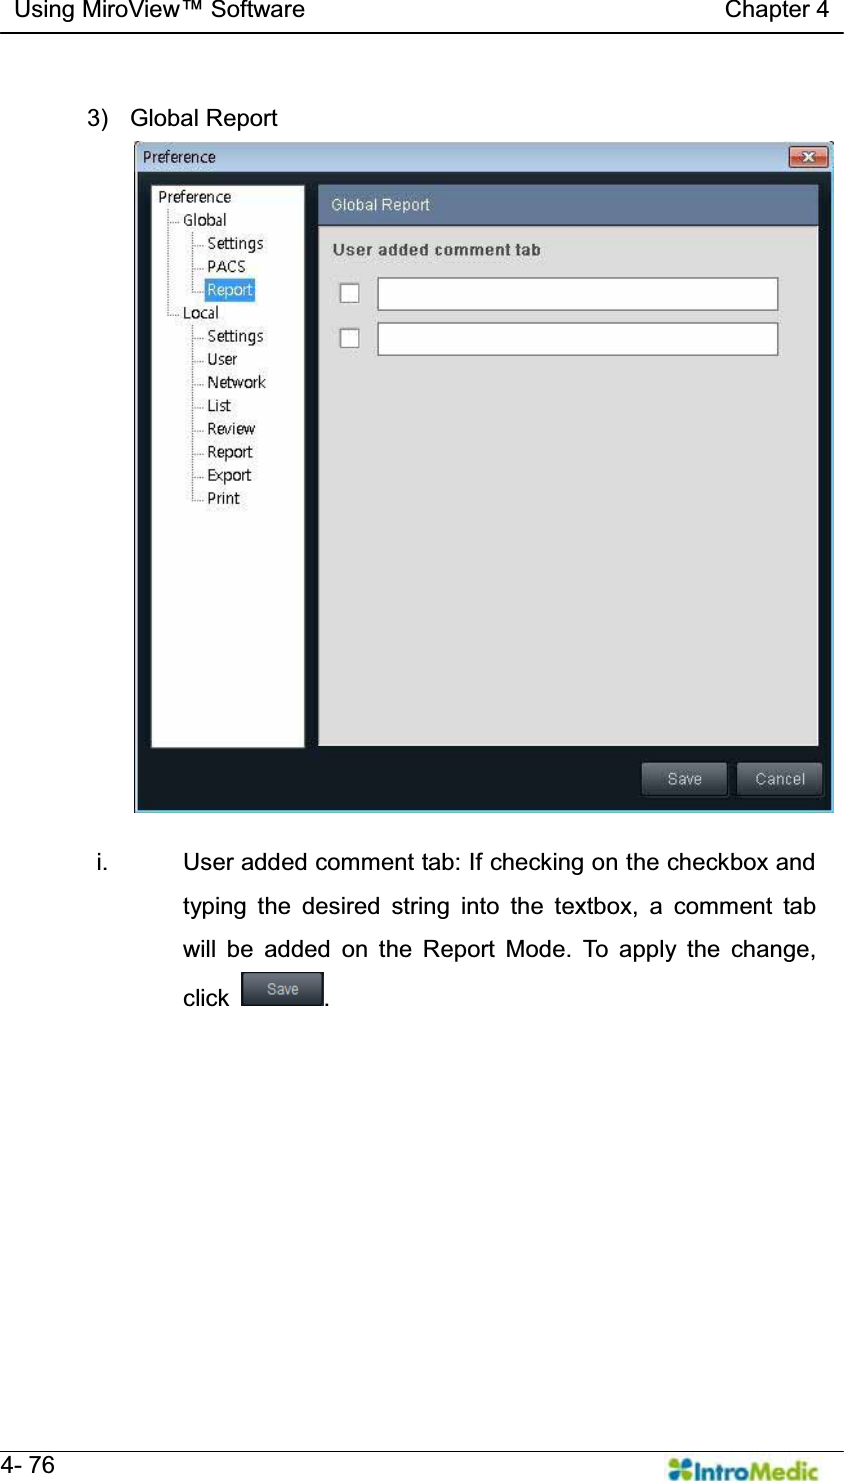   Using MiroView Software                                   Chapter 4   4- 76  3) Global Report  i.  User added comment tab: If checking on the checkbox and typing the desired string into the textbox, a comment tab will be added on the Report Mode. To apply the change, click  . 